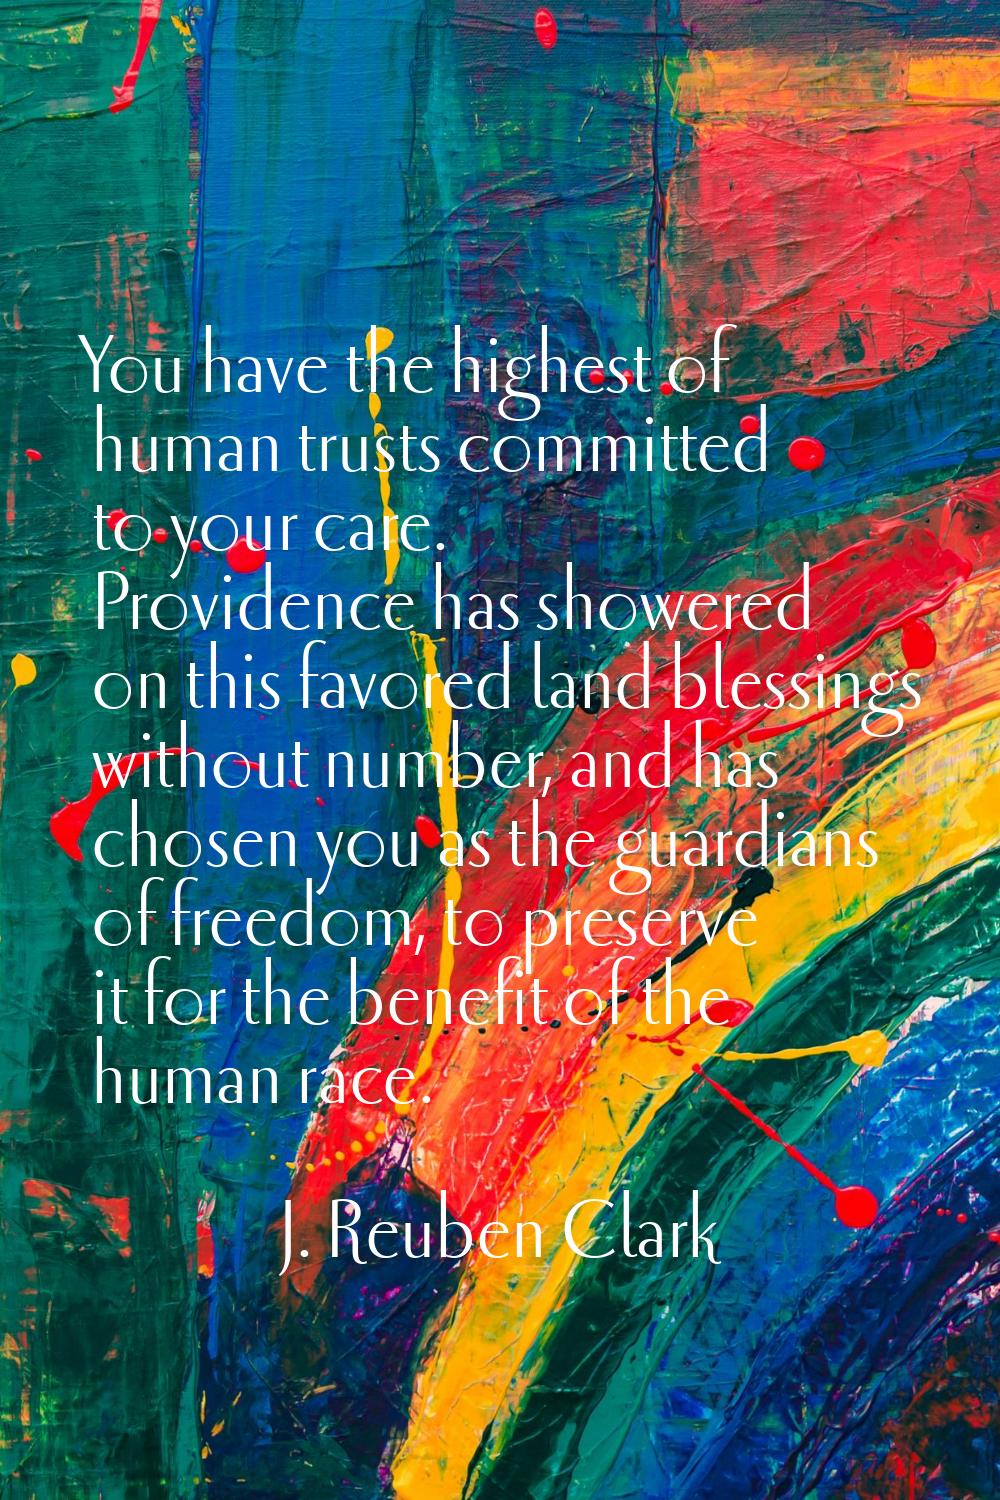 You have the highest of human trusts committed to your care. Providence has showered on this favore